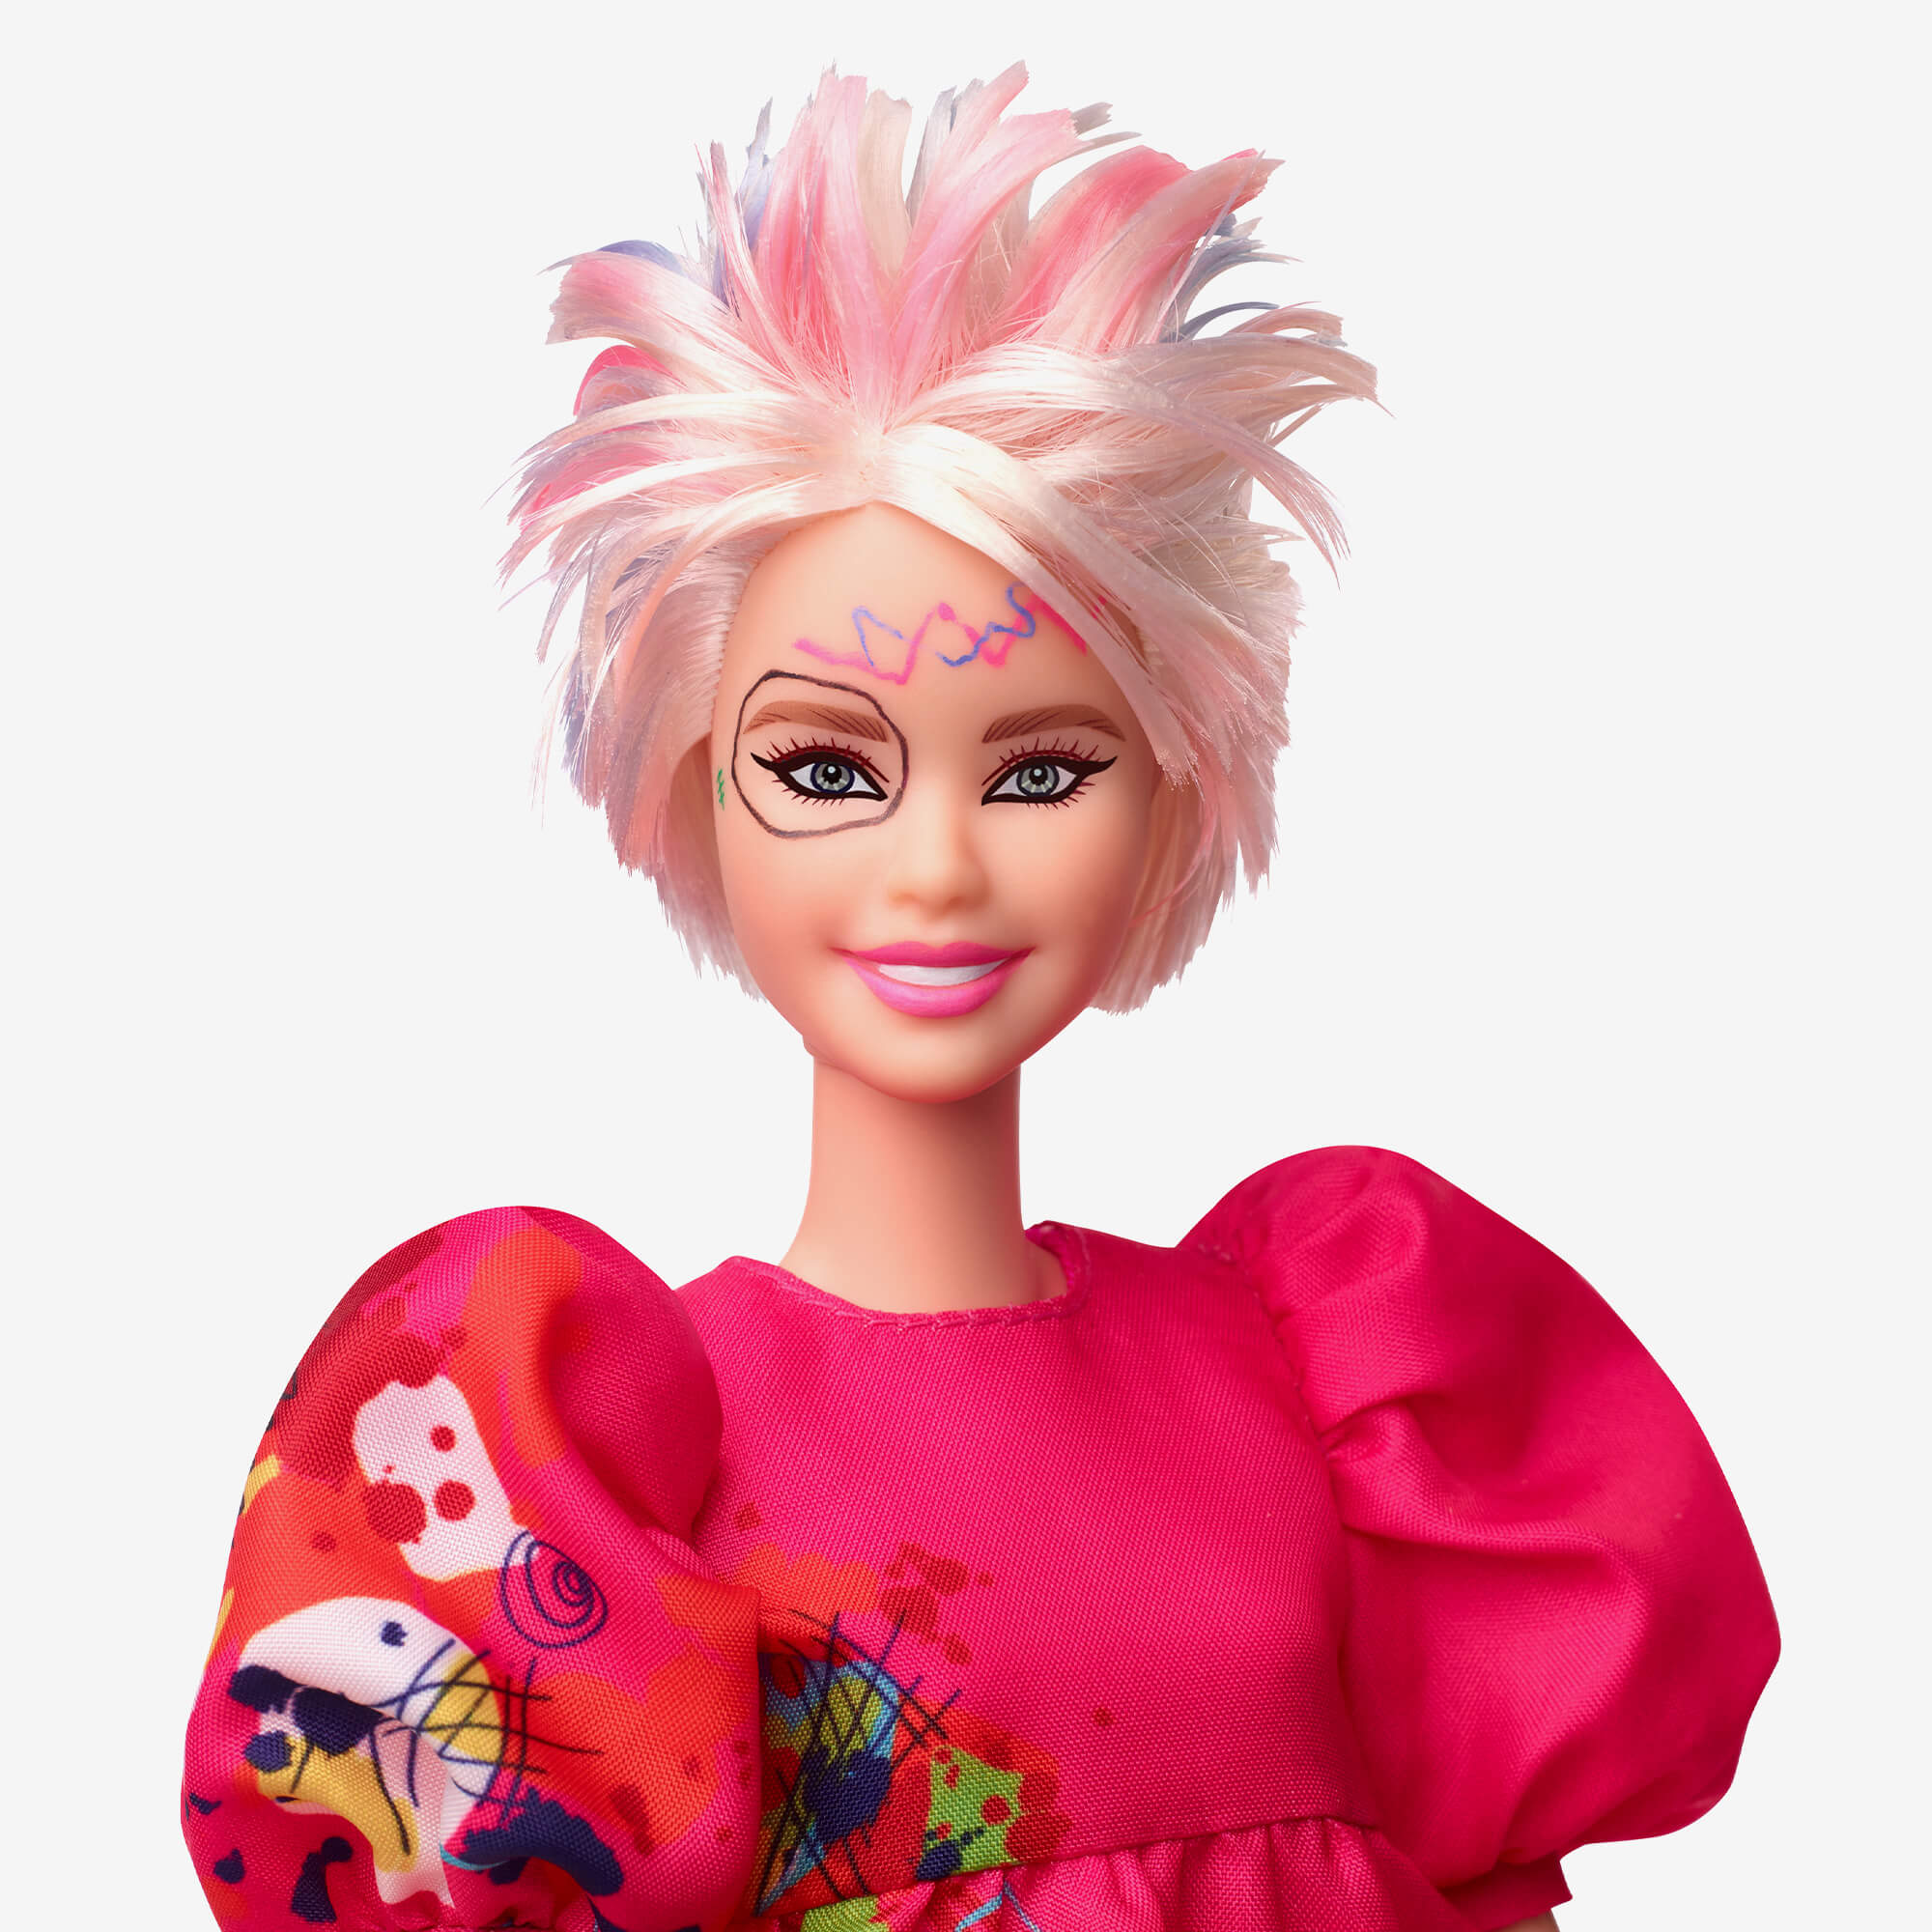 May The Weird Barbie Be With You Today. Amen. : r/Barbie